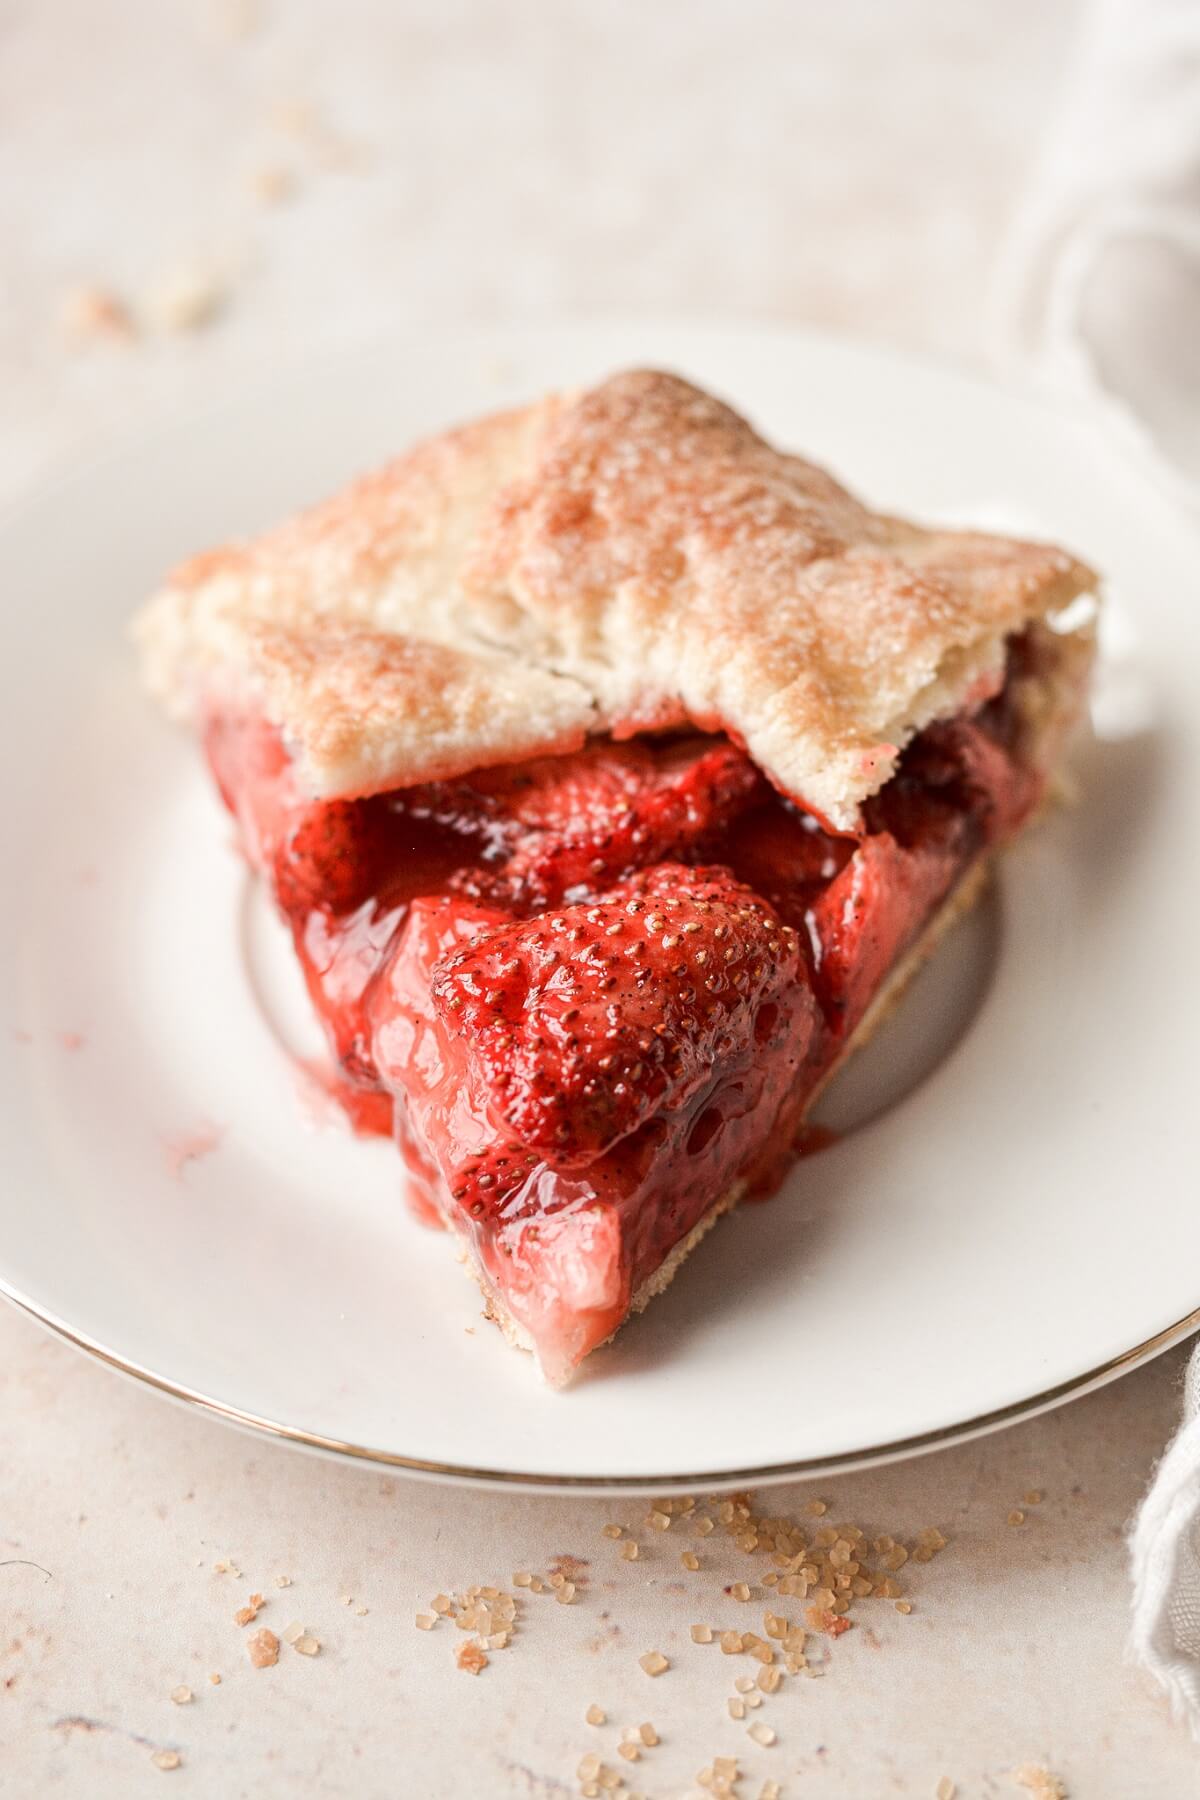 A slice of strawberry galette.